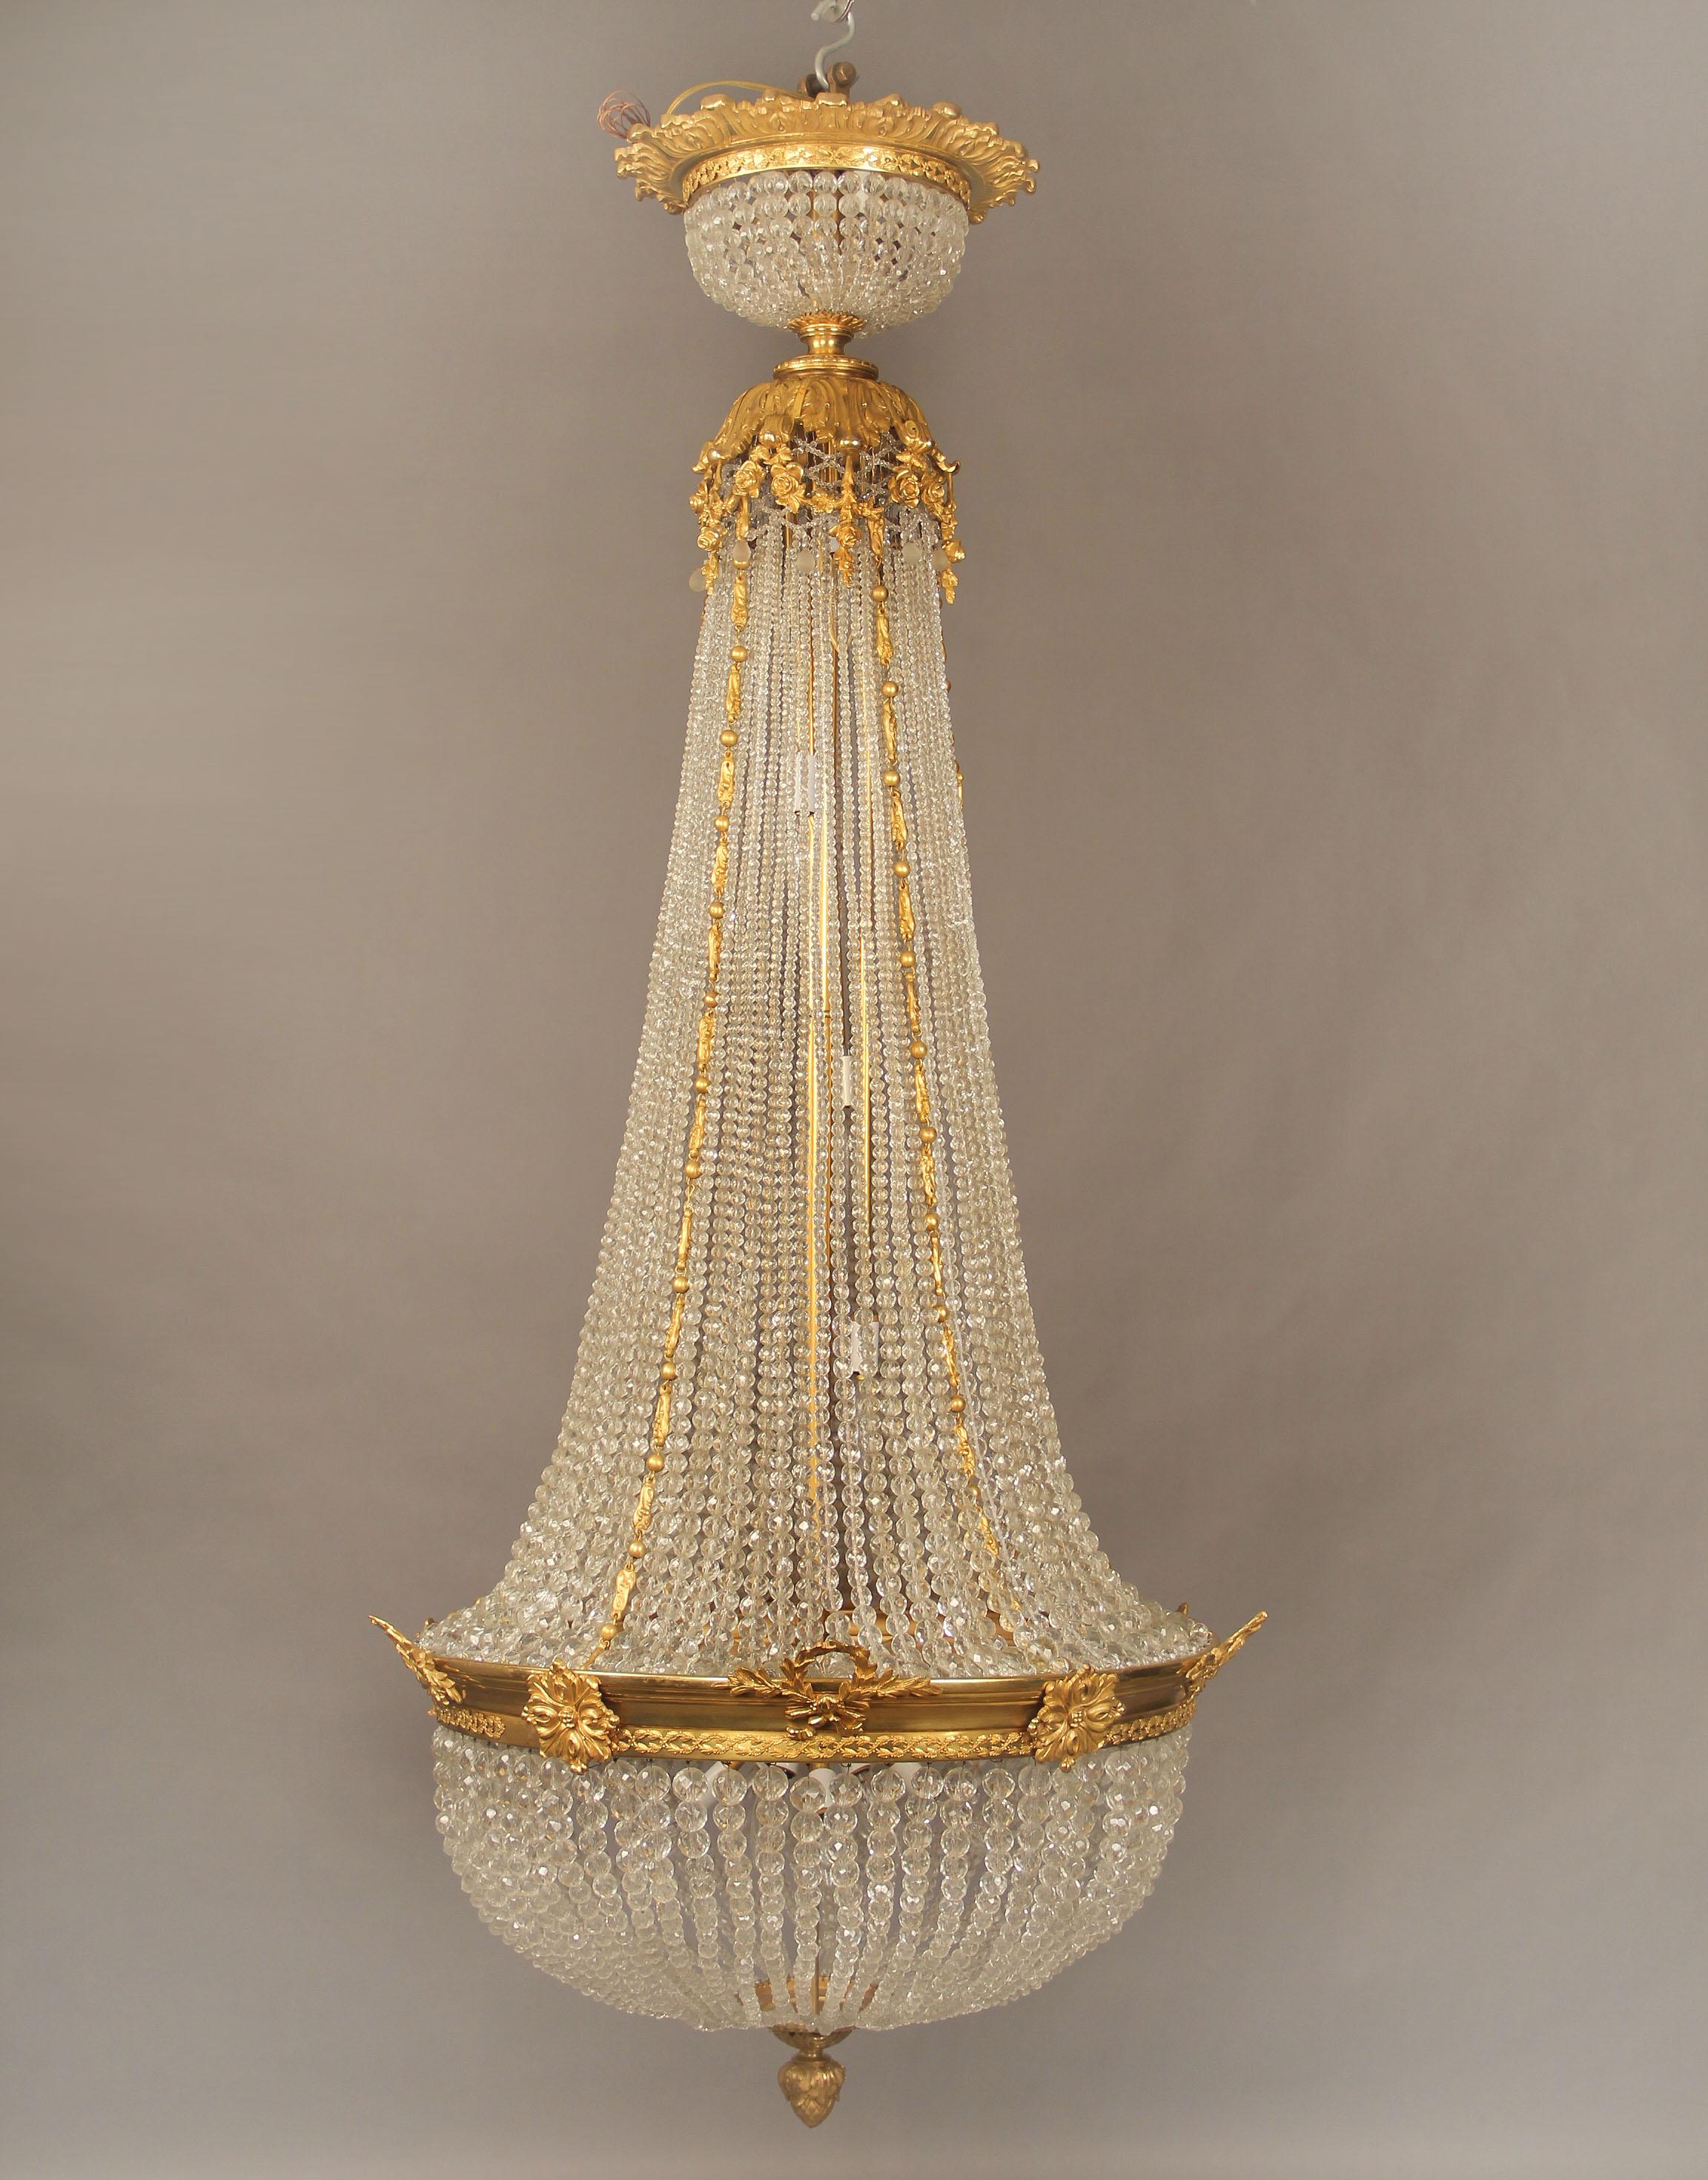 A Lovely Late 19th/Early 20th Century Gilt Bronze and Beaded Twenty Light Basket Chandelier

The crown designed with bronze roses and flowers, the flowing crystal beads connected to a bronze conforming entwined garland frieze with wreaths, an acorn